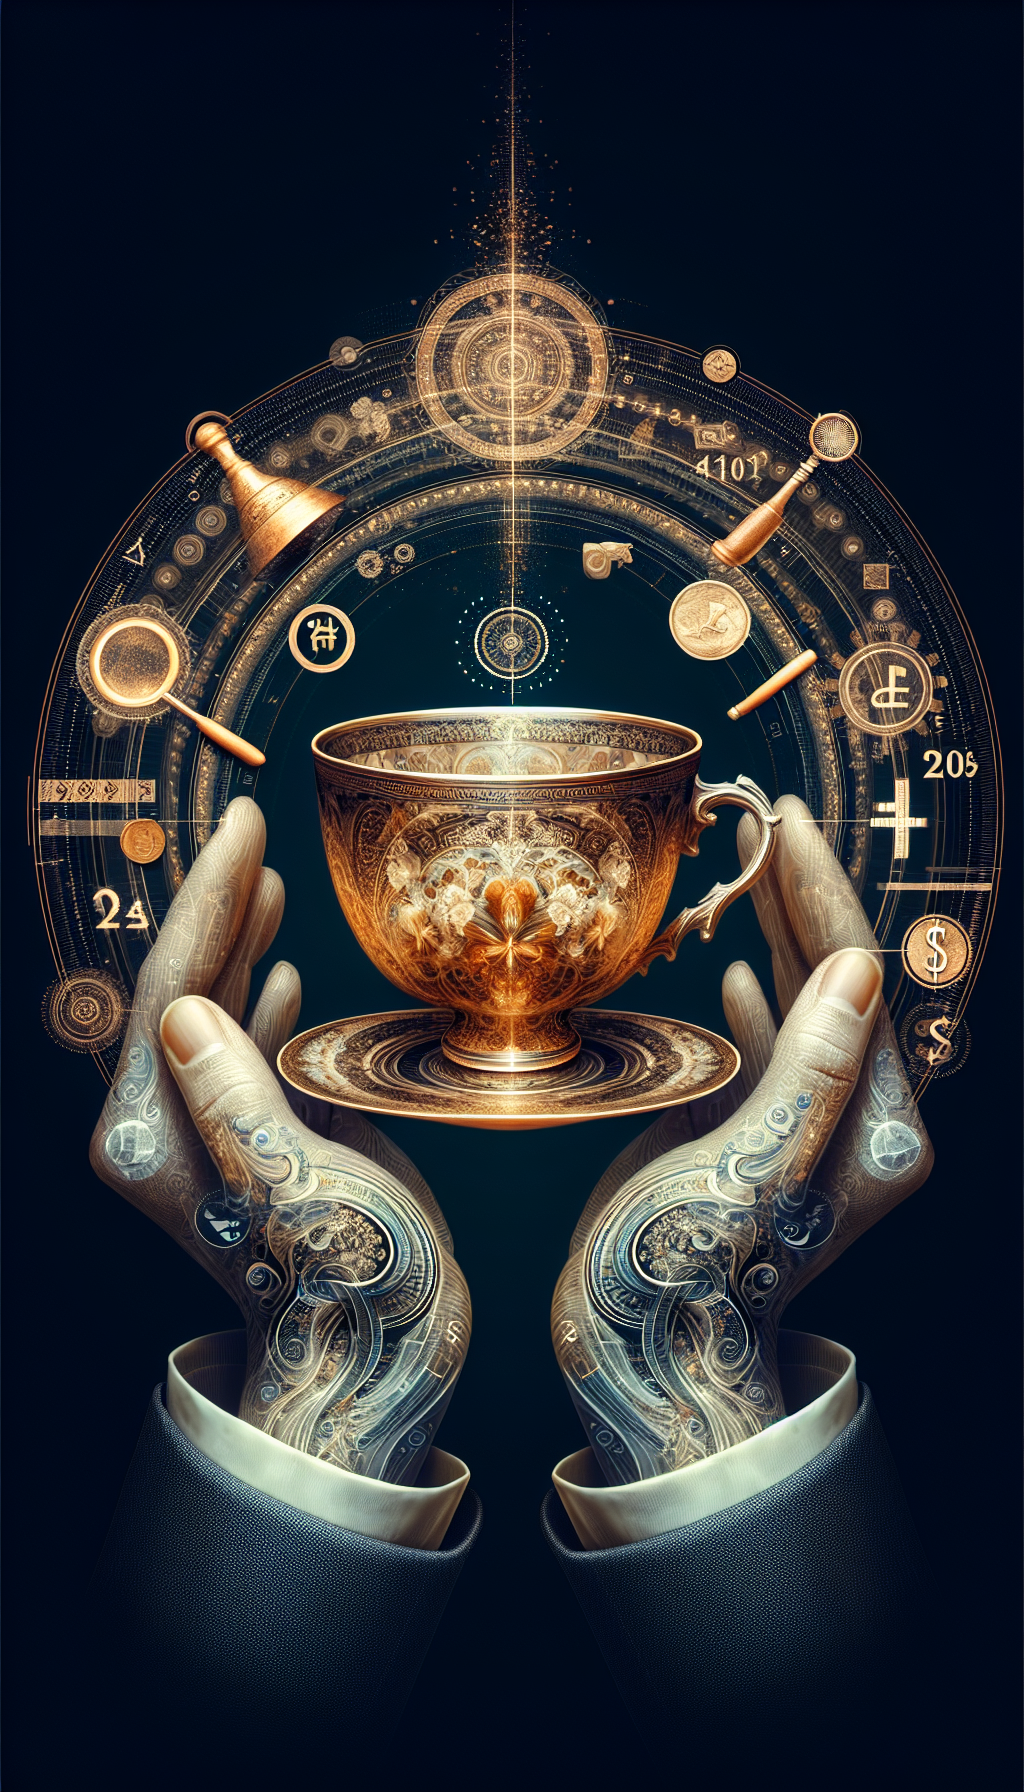 An illustration of an elegant, translucent antique teacup, cradled by a pair of ethereal, ghostly hands. The cup's delicate porcelain adorned with fine gold-leaf patterns, refracts an array of numbers and symbols representing currencies, auction hammers, and magnifying glasses. The teacup, as the centerpiece, is surrounded by a semi-circle of diverse elements like age rings, a patina texture, and a small crack to signify its history and value.